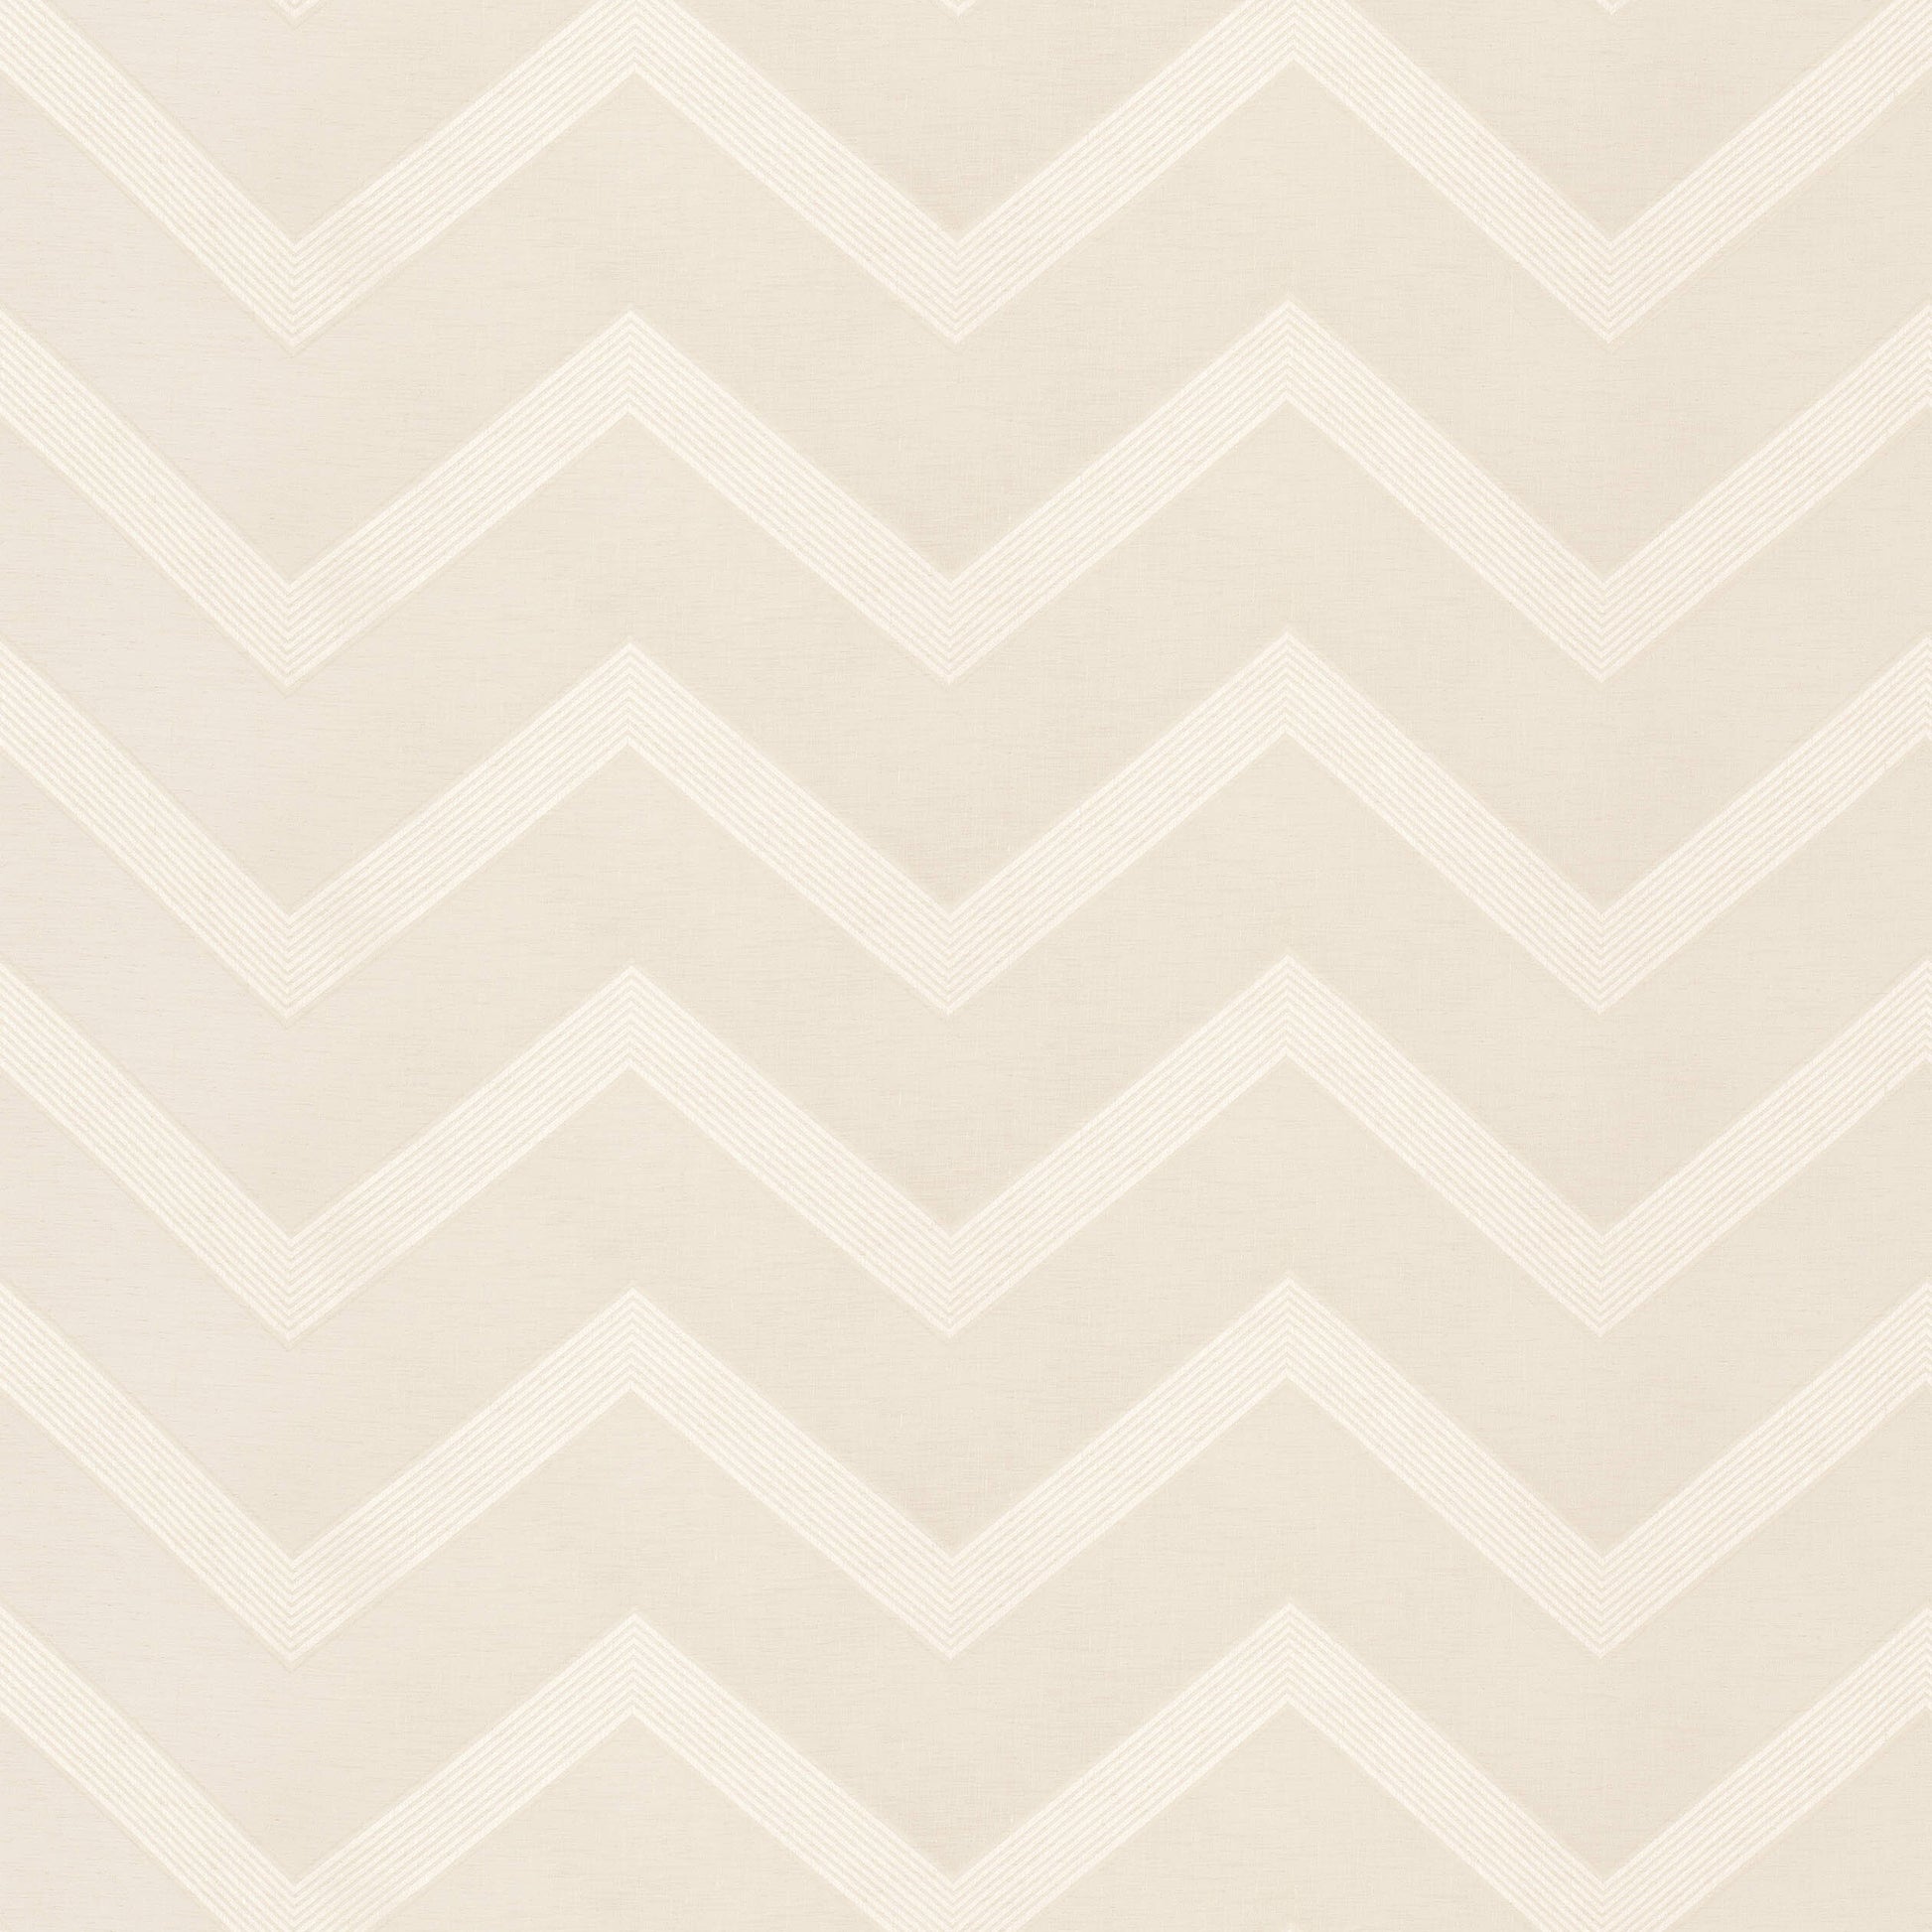 Purchase  Ann French Fabric Product# AW9134  pattern name  Adalar Chevron